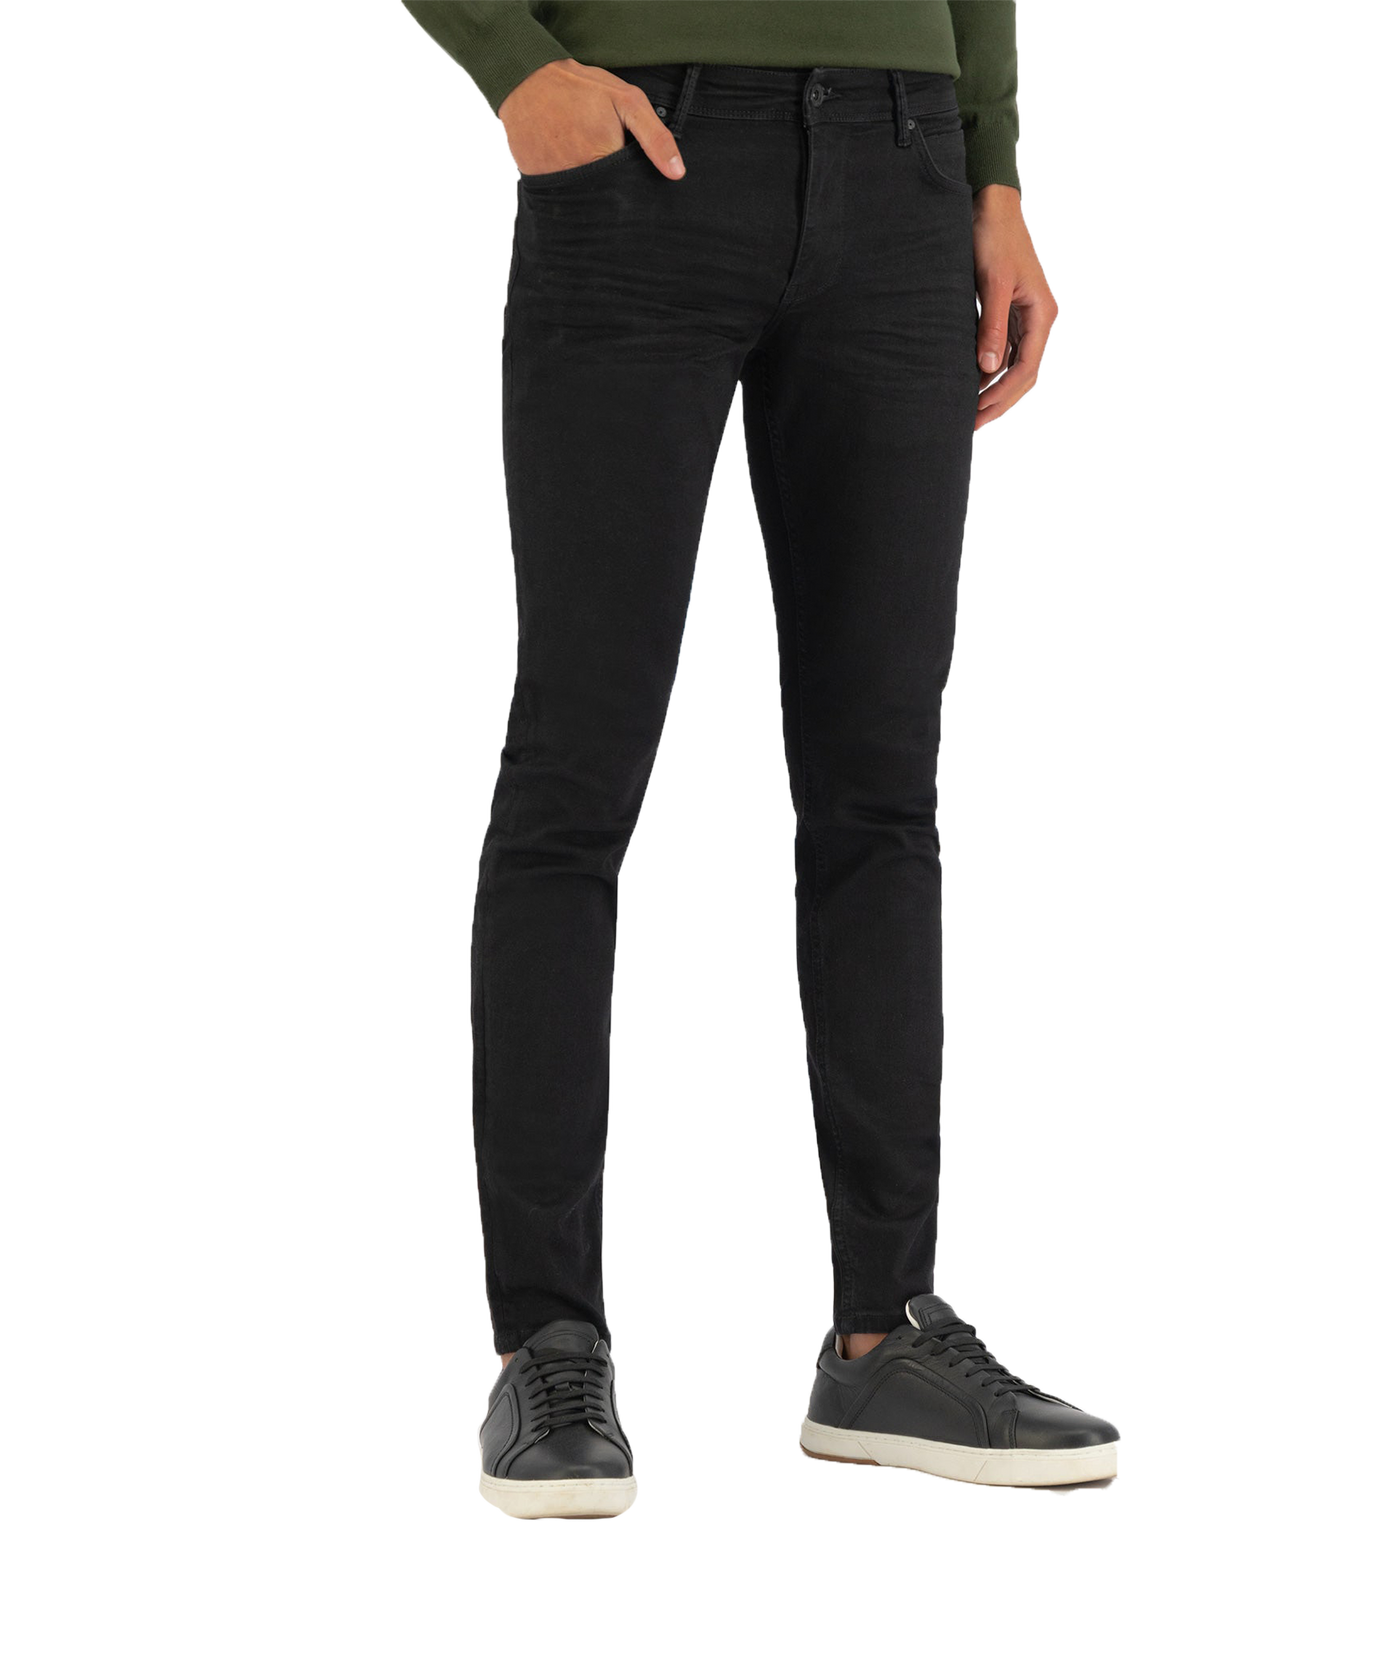 PureWhite - Slim Fit Black Jeans, Detailed With Black